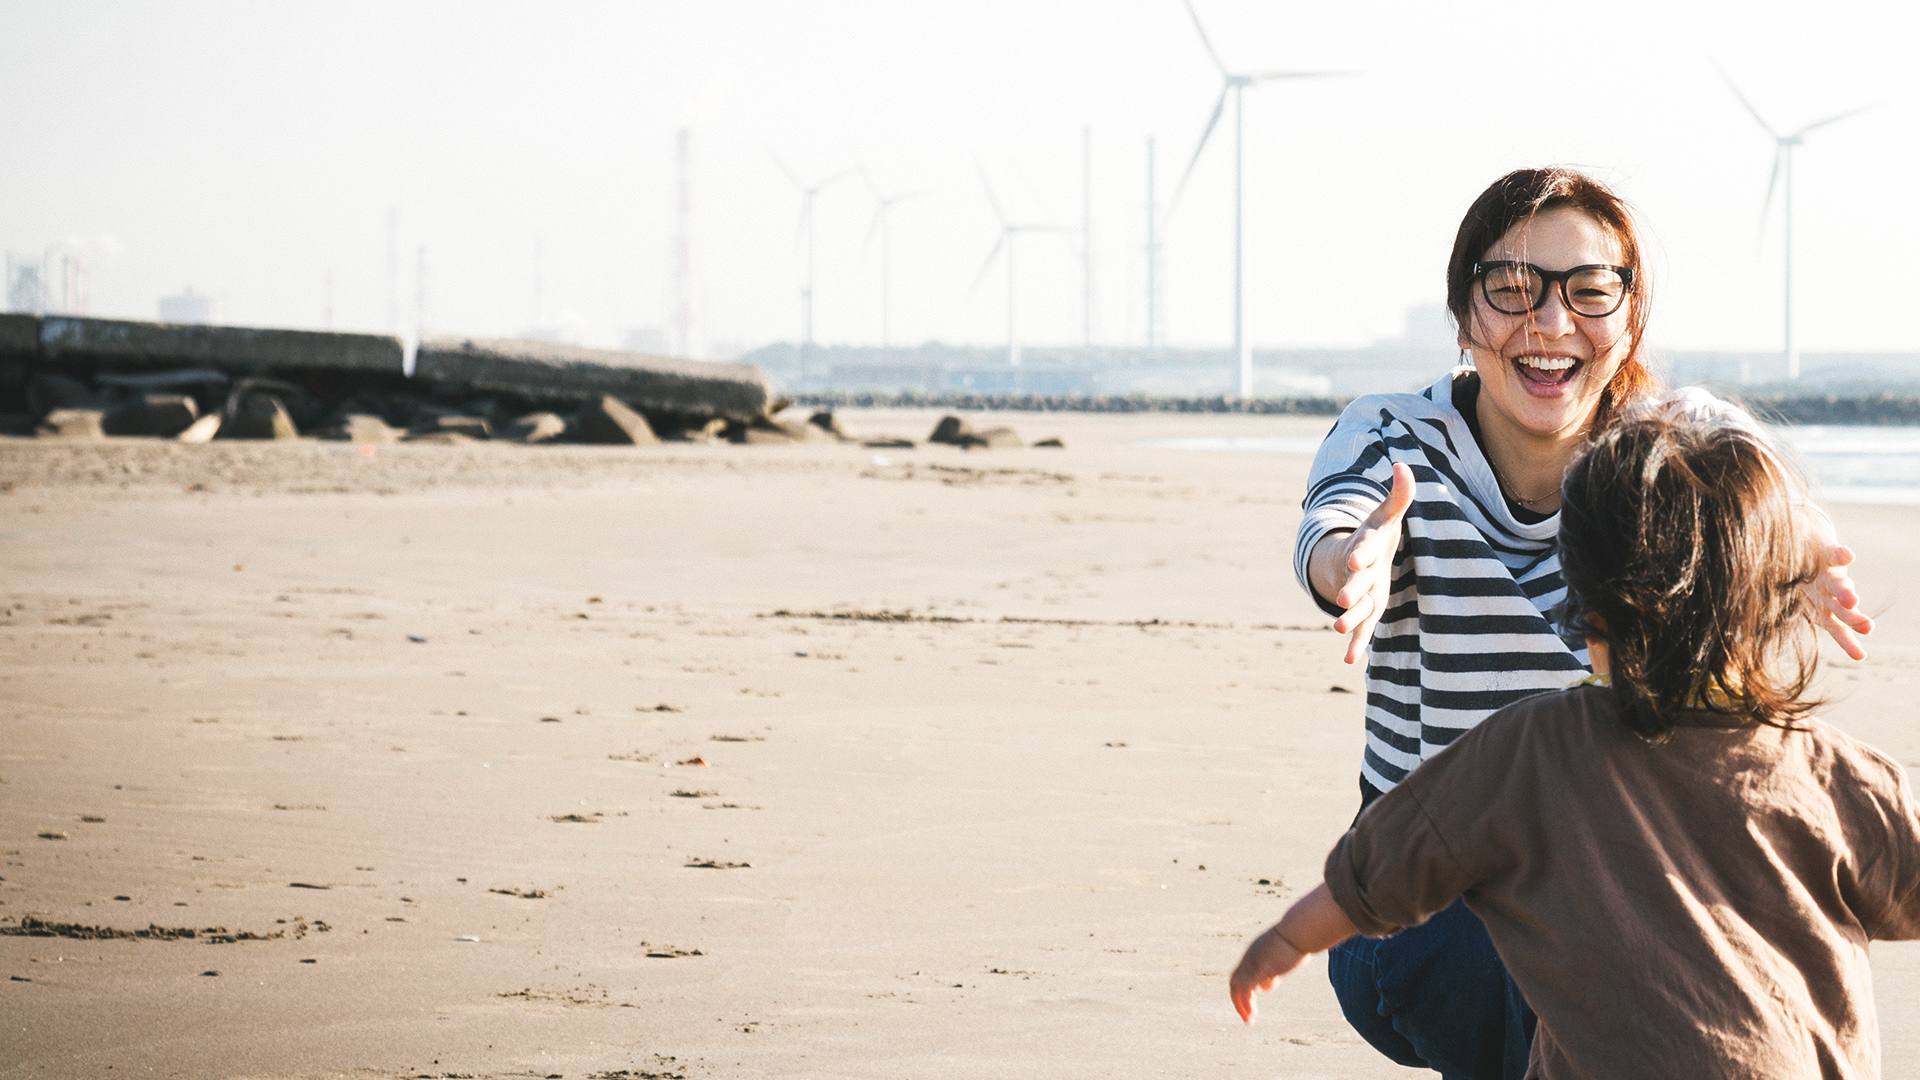 Kid running to mother on a beach with windmills